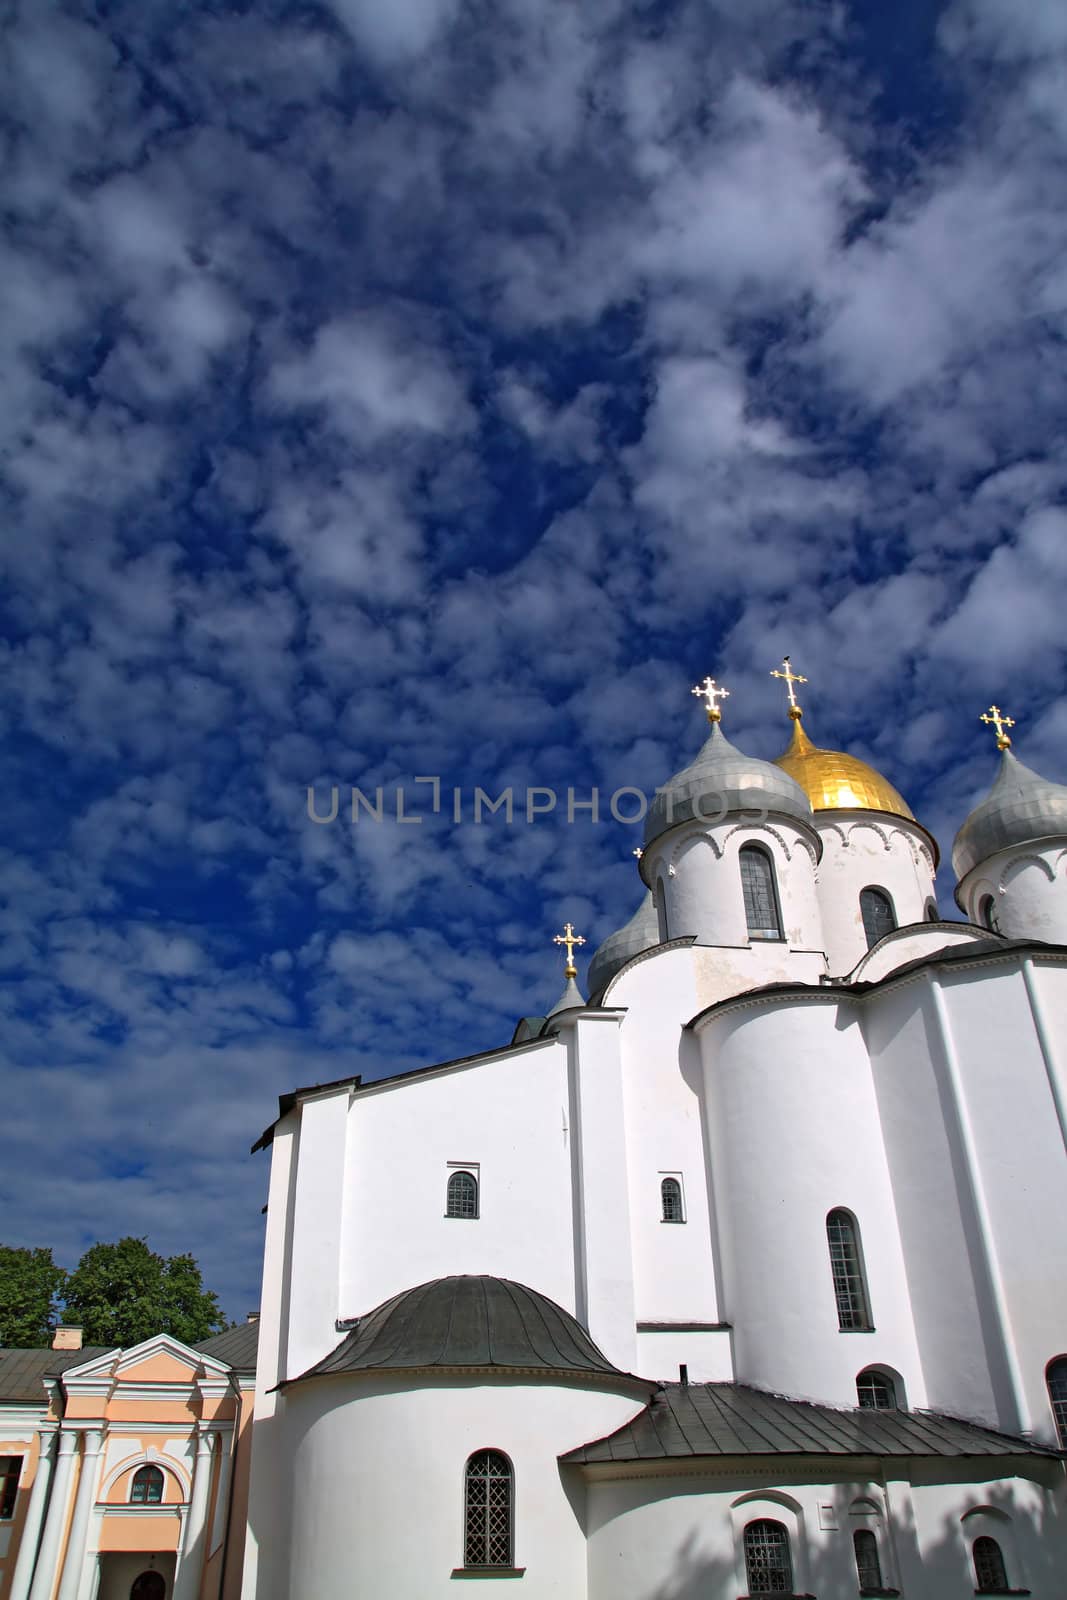 christian orthodox church on cloudy background by basel101658